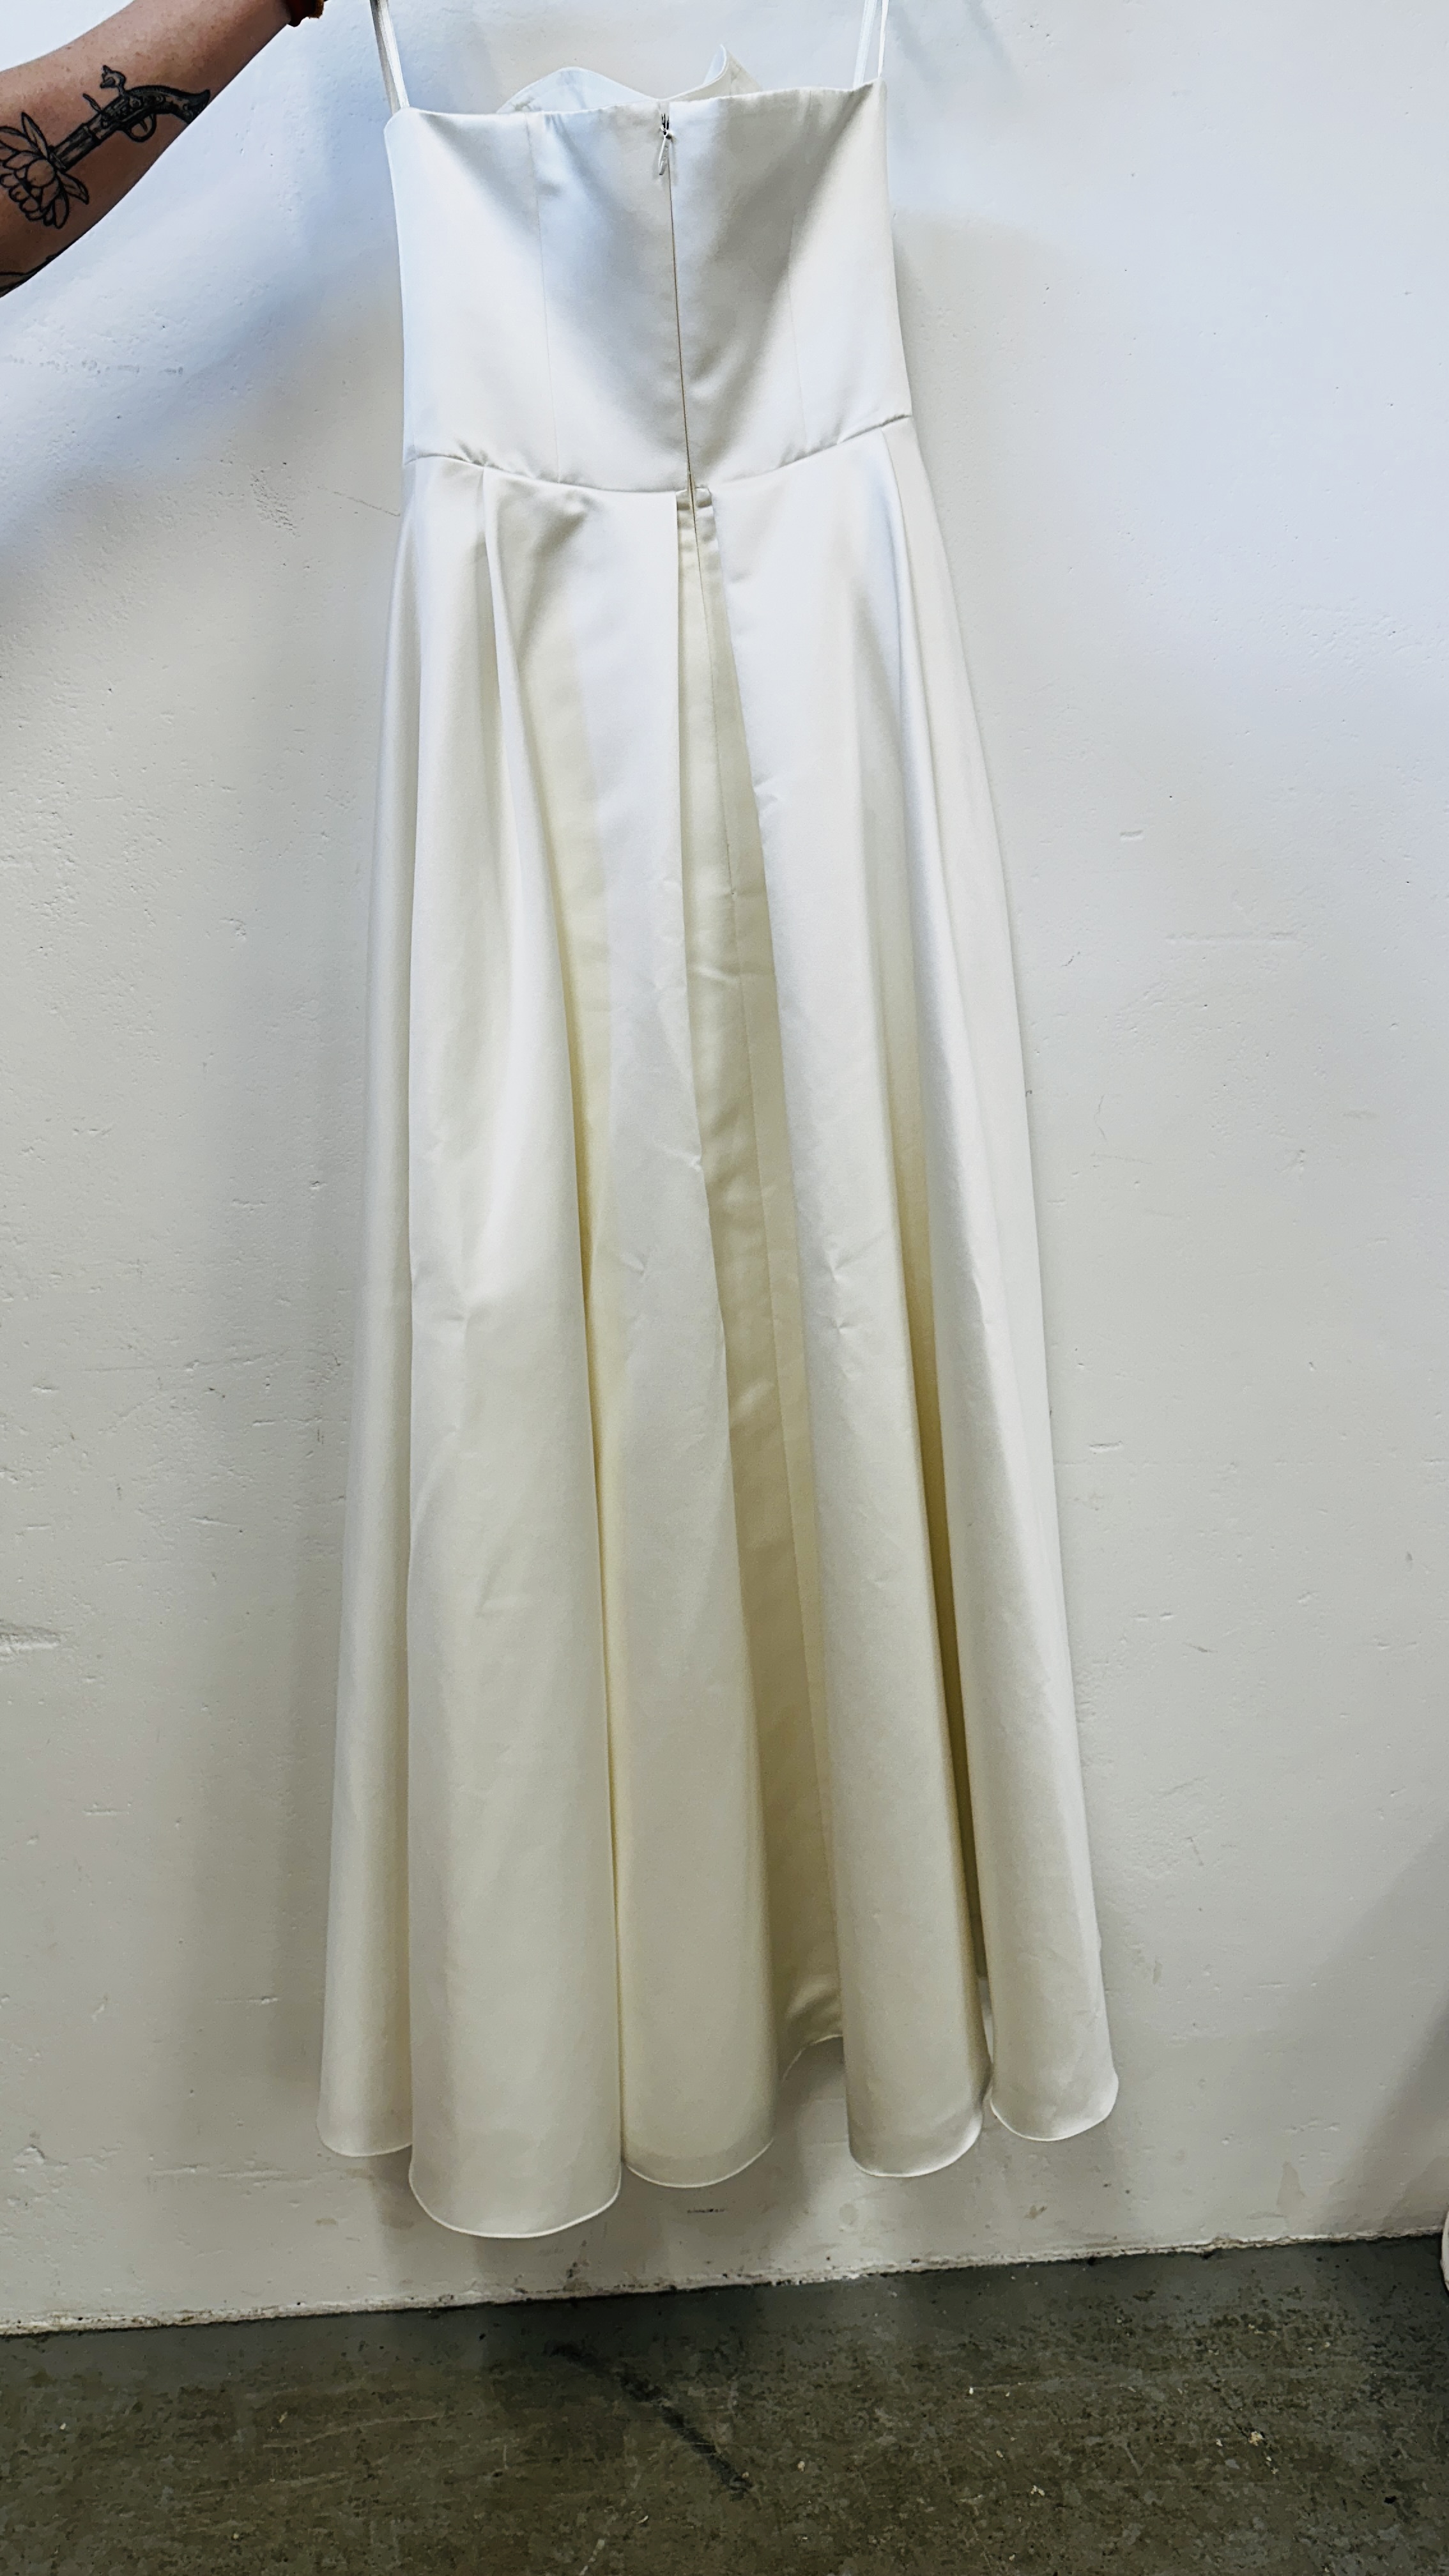 A "BIANCO EVENTO" WEDDING DRESS 40/L ALONG WITH TWO VEILS. - Image 5 of 11